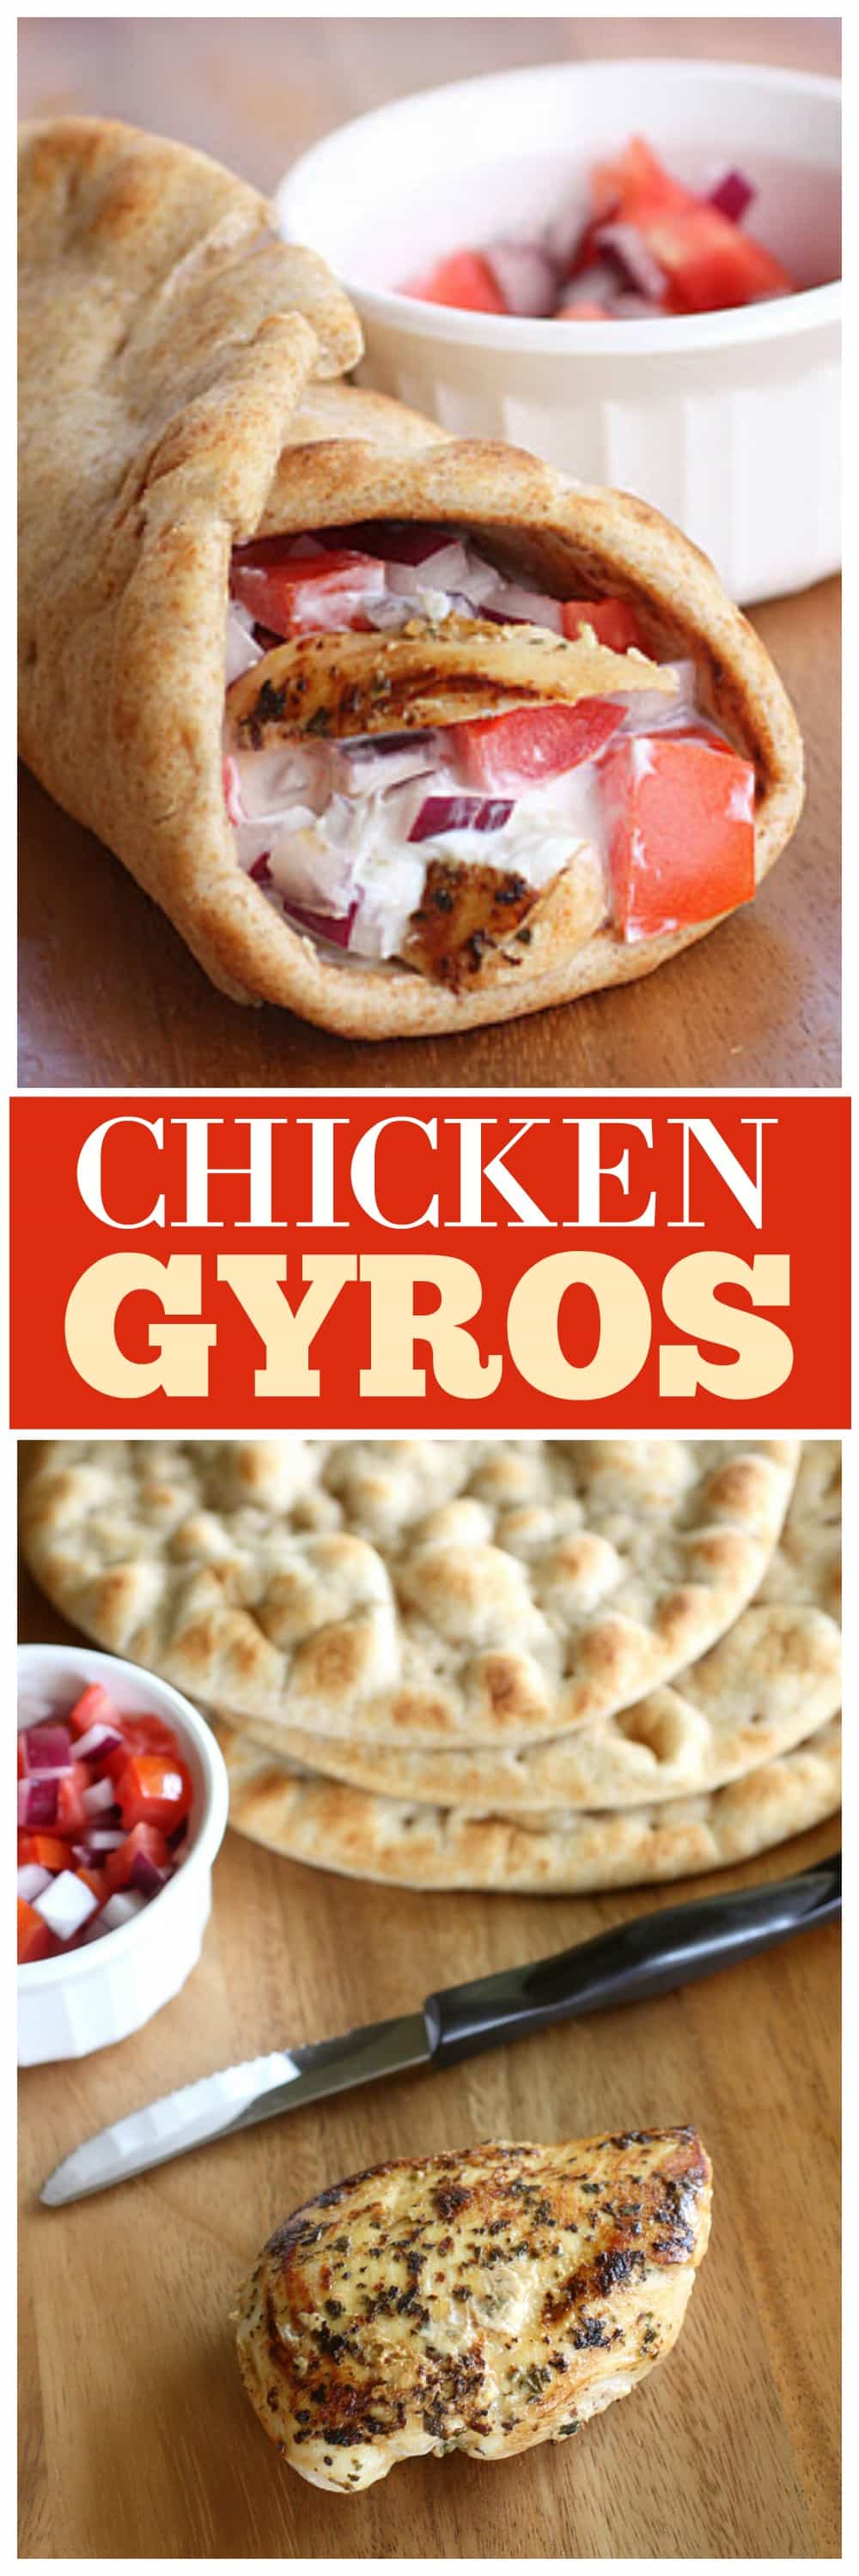 Chicken Gyros - Greek marinated chicken topped with fresh tzatziki sauce. This is a delicious healthy dinner. #chicken #gyros #healthy #greek #dinner